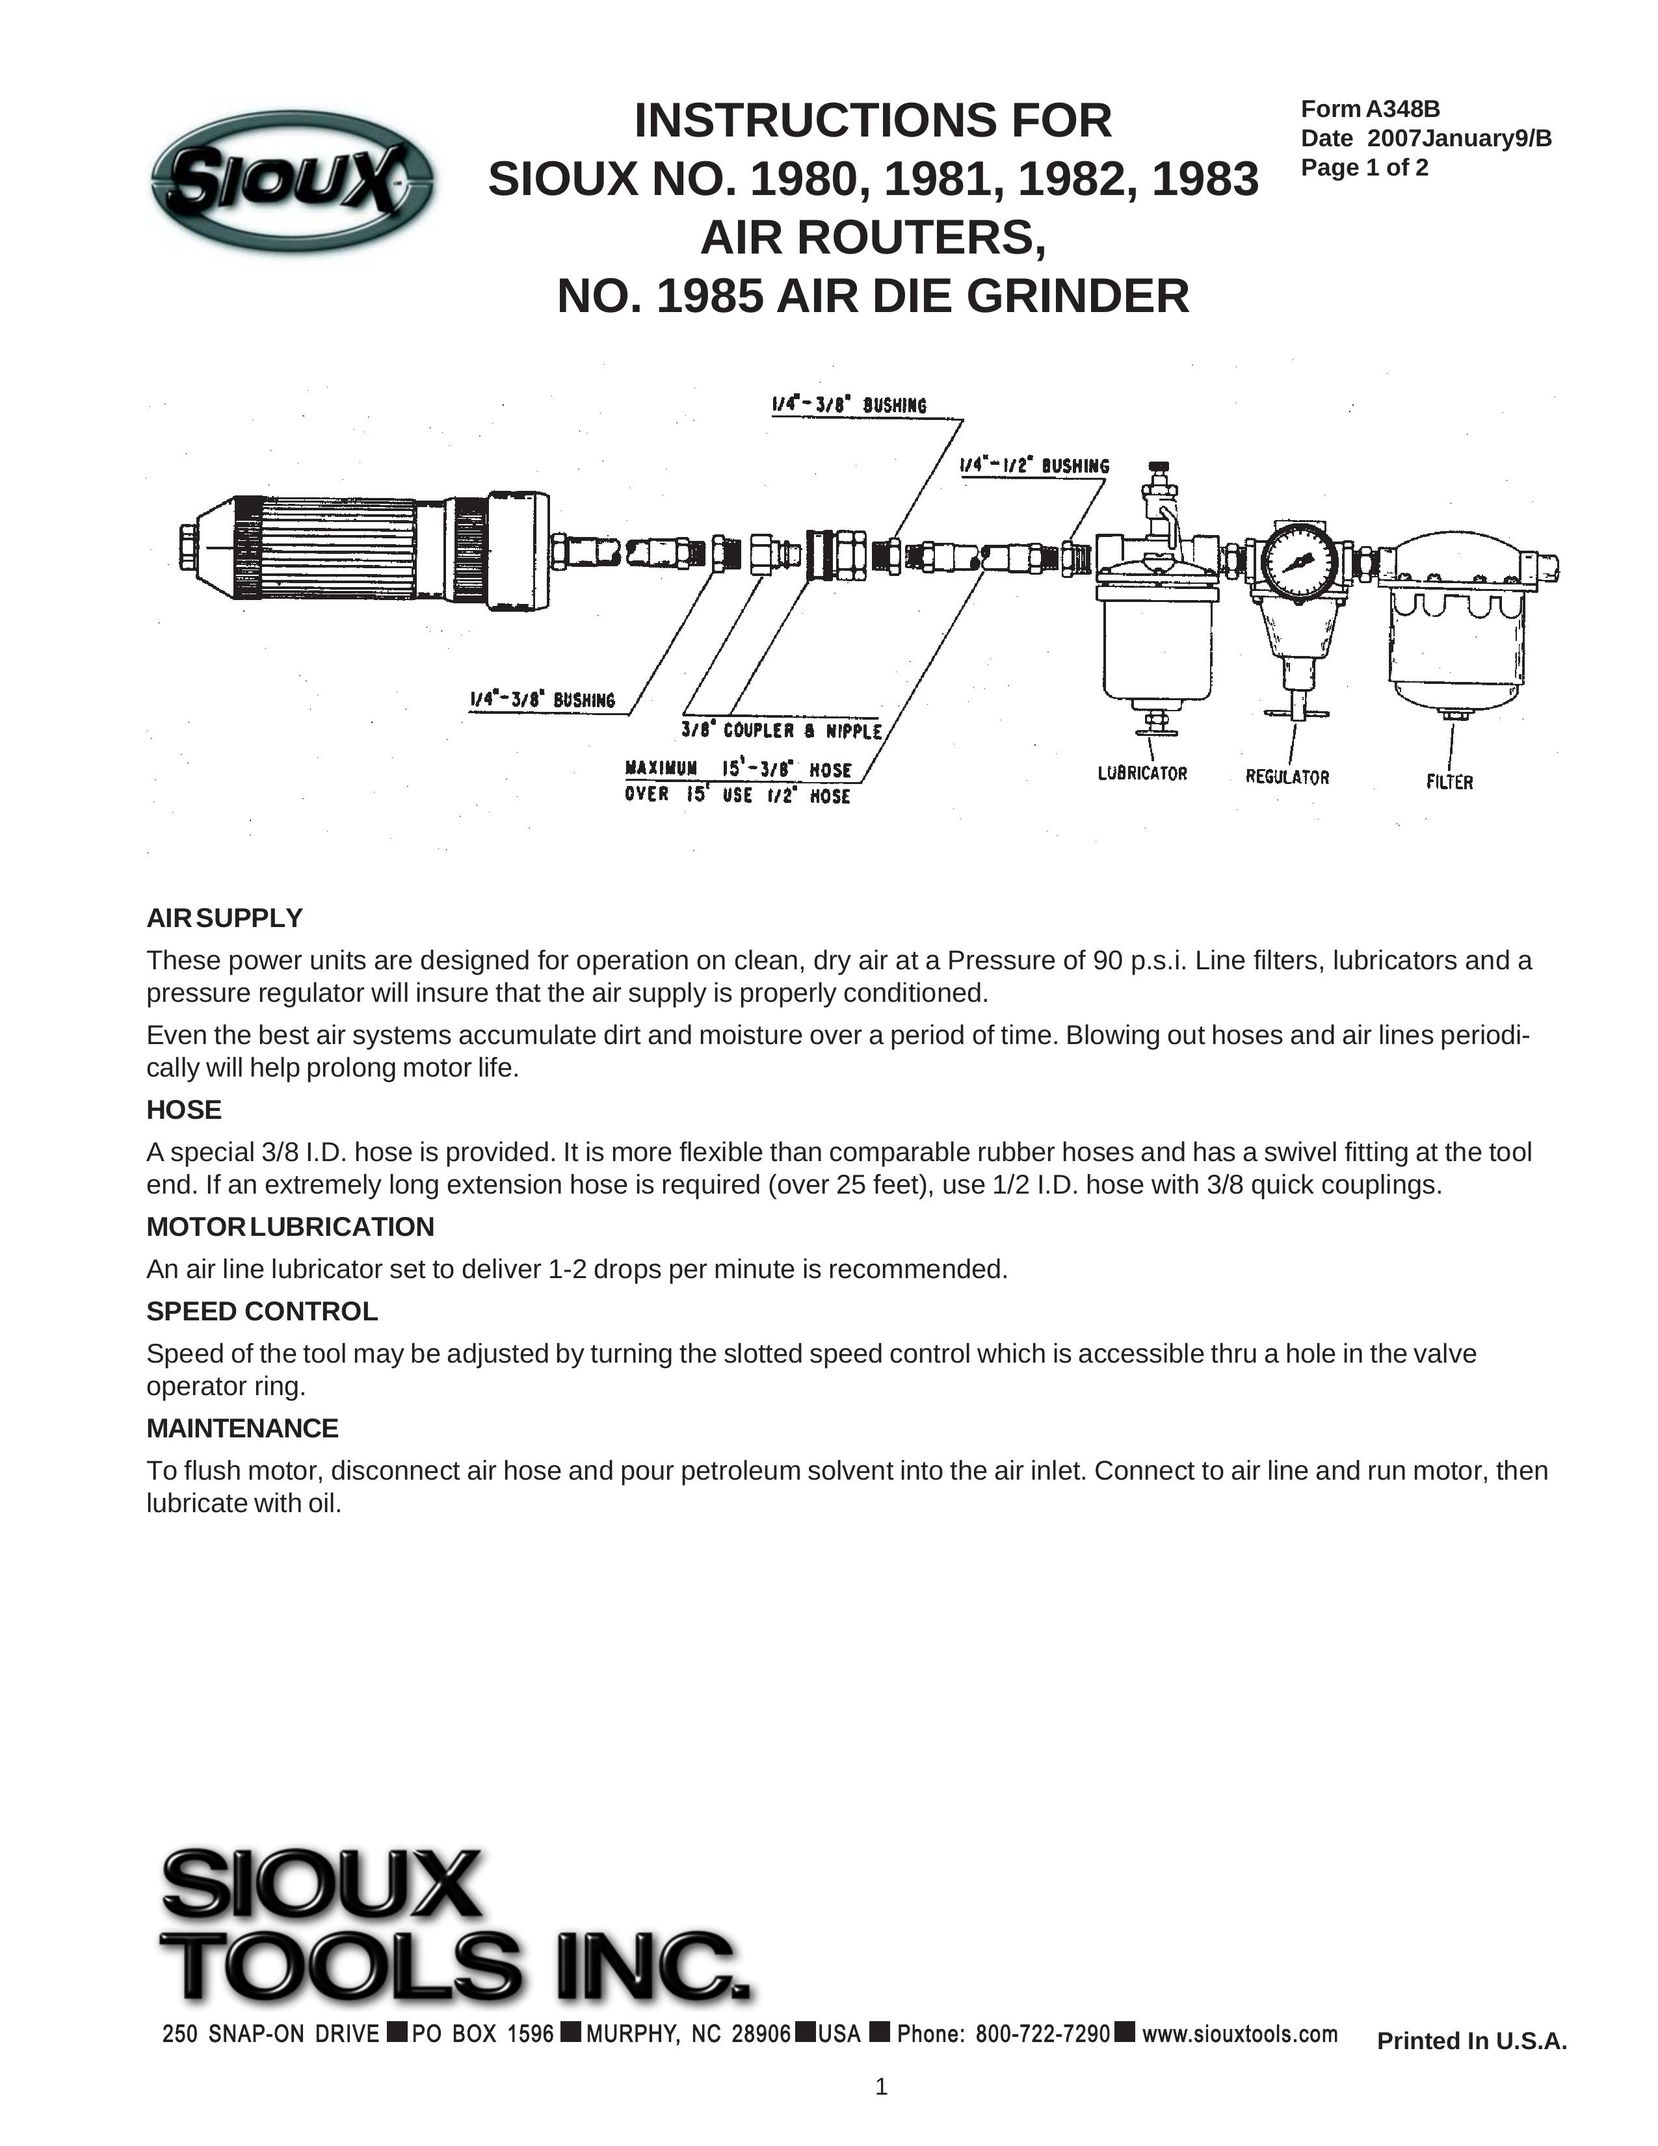 Sioux Tools 1980 Grinder User Manual